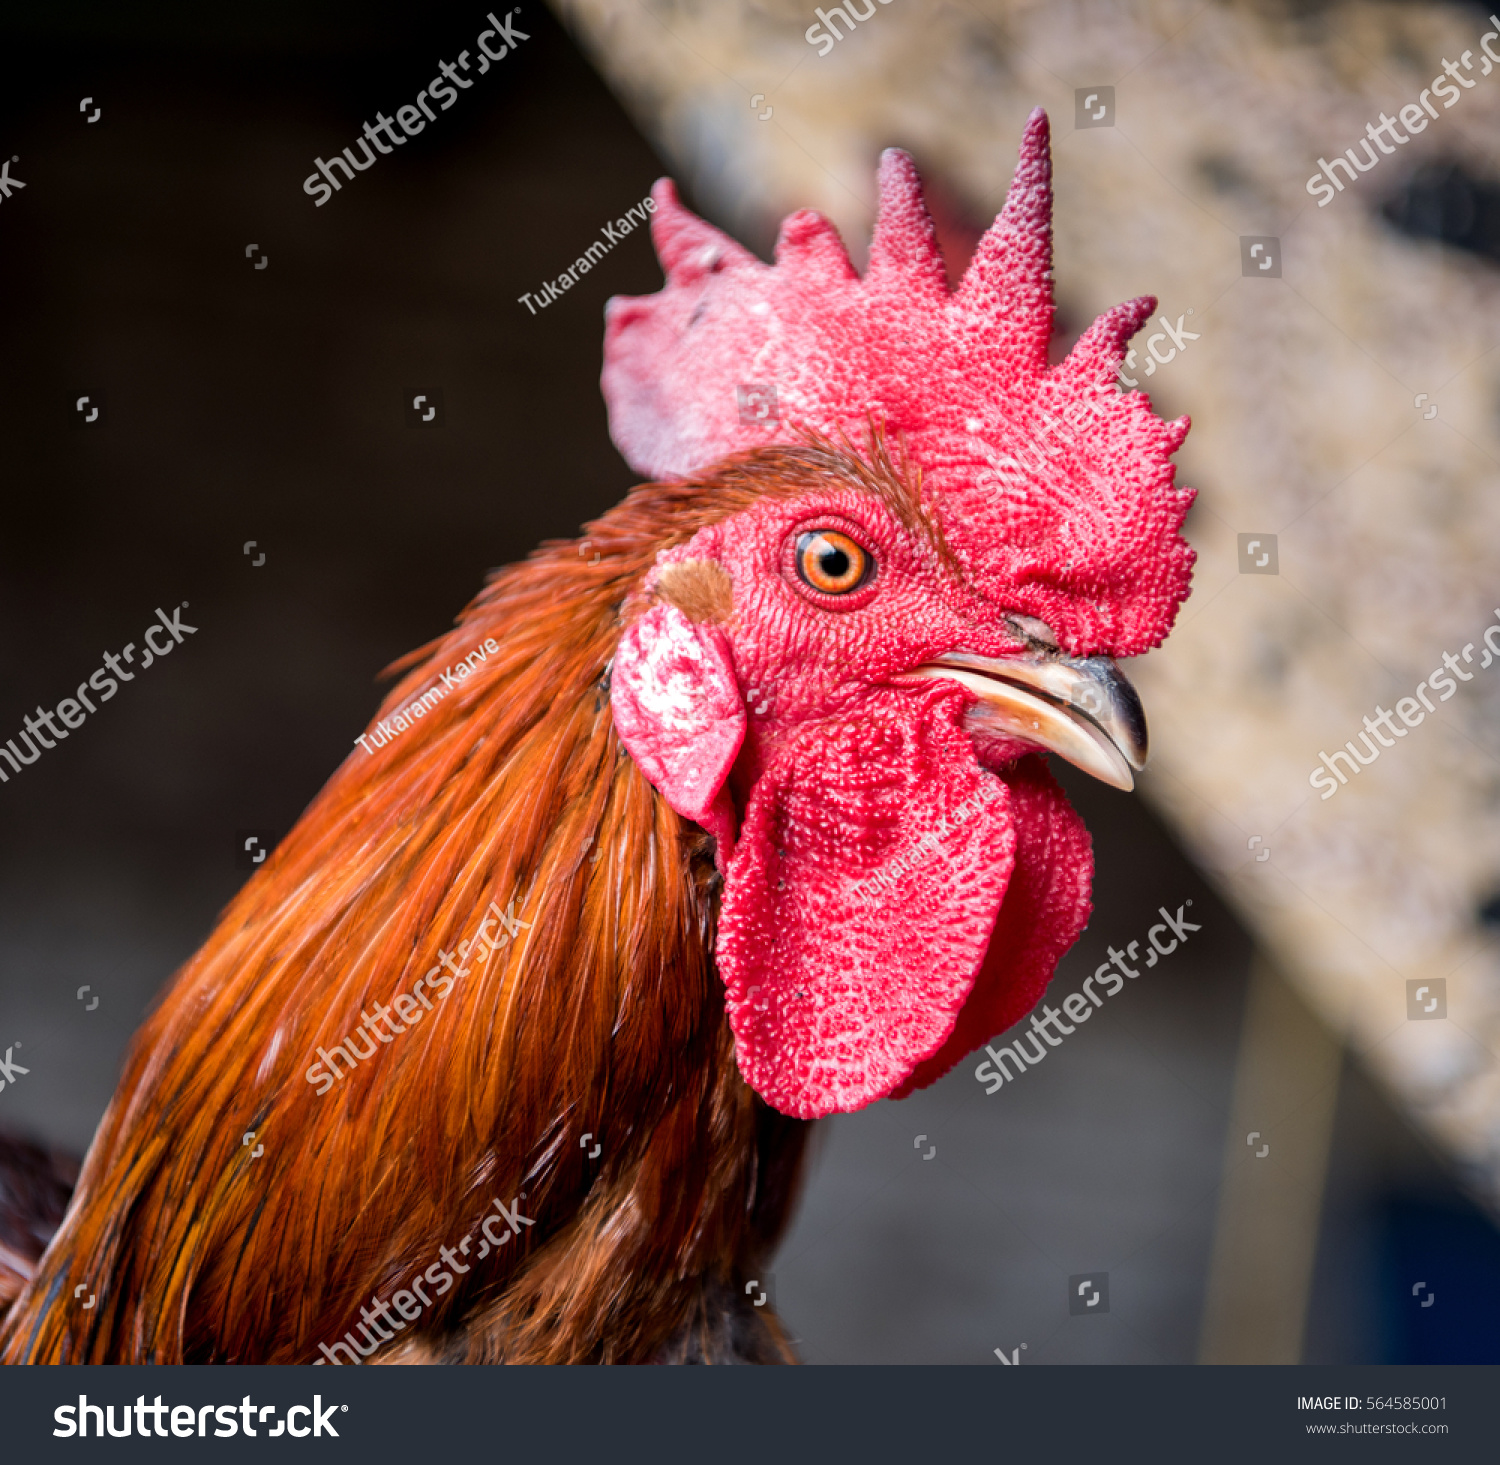 Red Rooster Closeup Poultry Farm Rural Stock Photo 564585001 ...